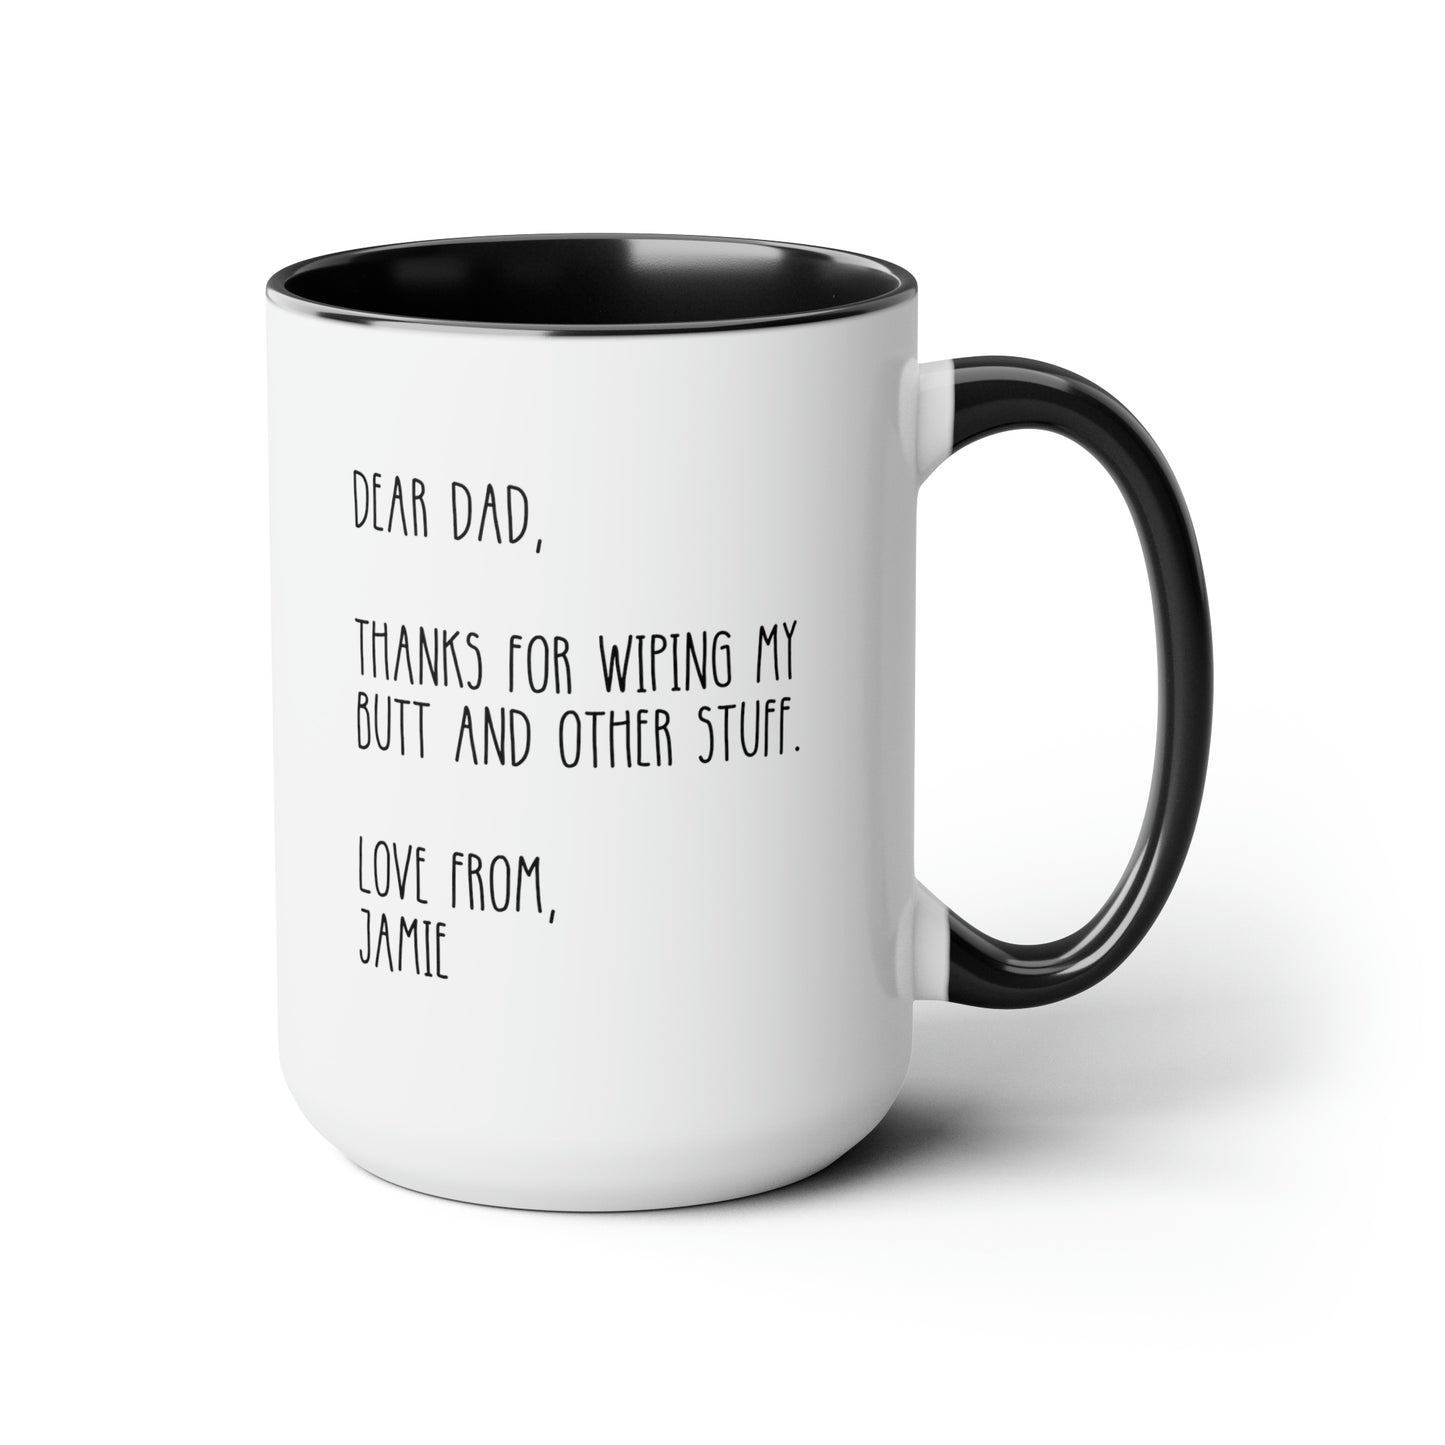 Dear Dad Thanks For Wiping My Butt And Other Stuff 15oz white with black accent funny large coffee mug gift for dad fathers day novelty gag papa custom name waveywares wavey wares wavywares wavy wares